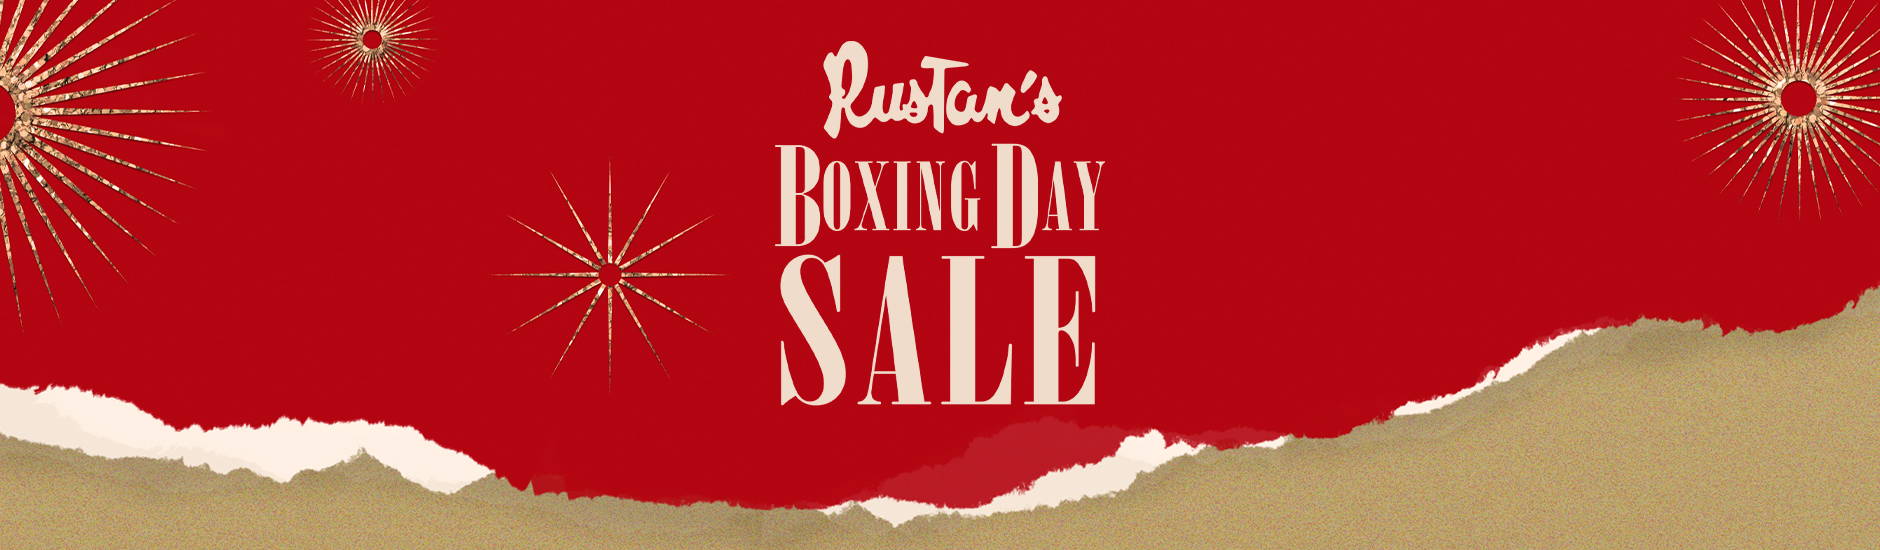 More Holiday Cheer this Season with Rustan's Boxing Day Sale